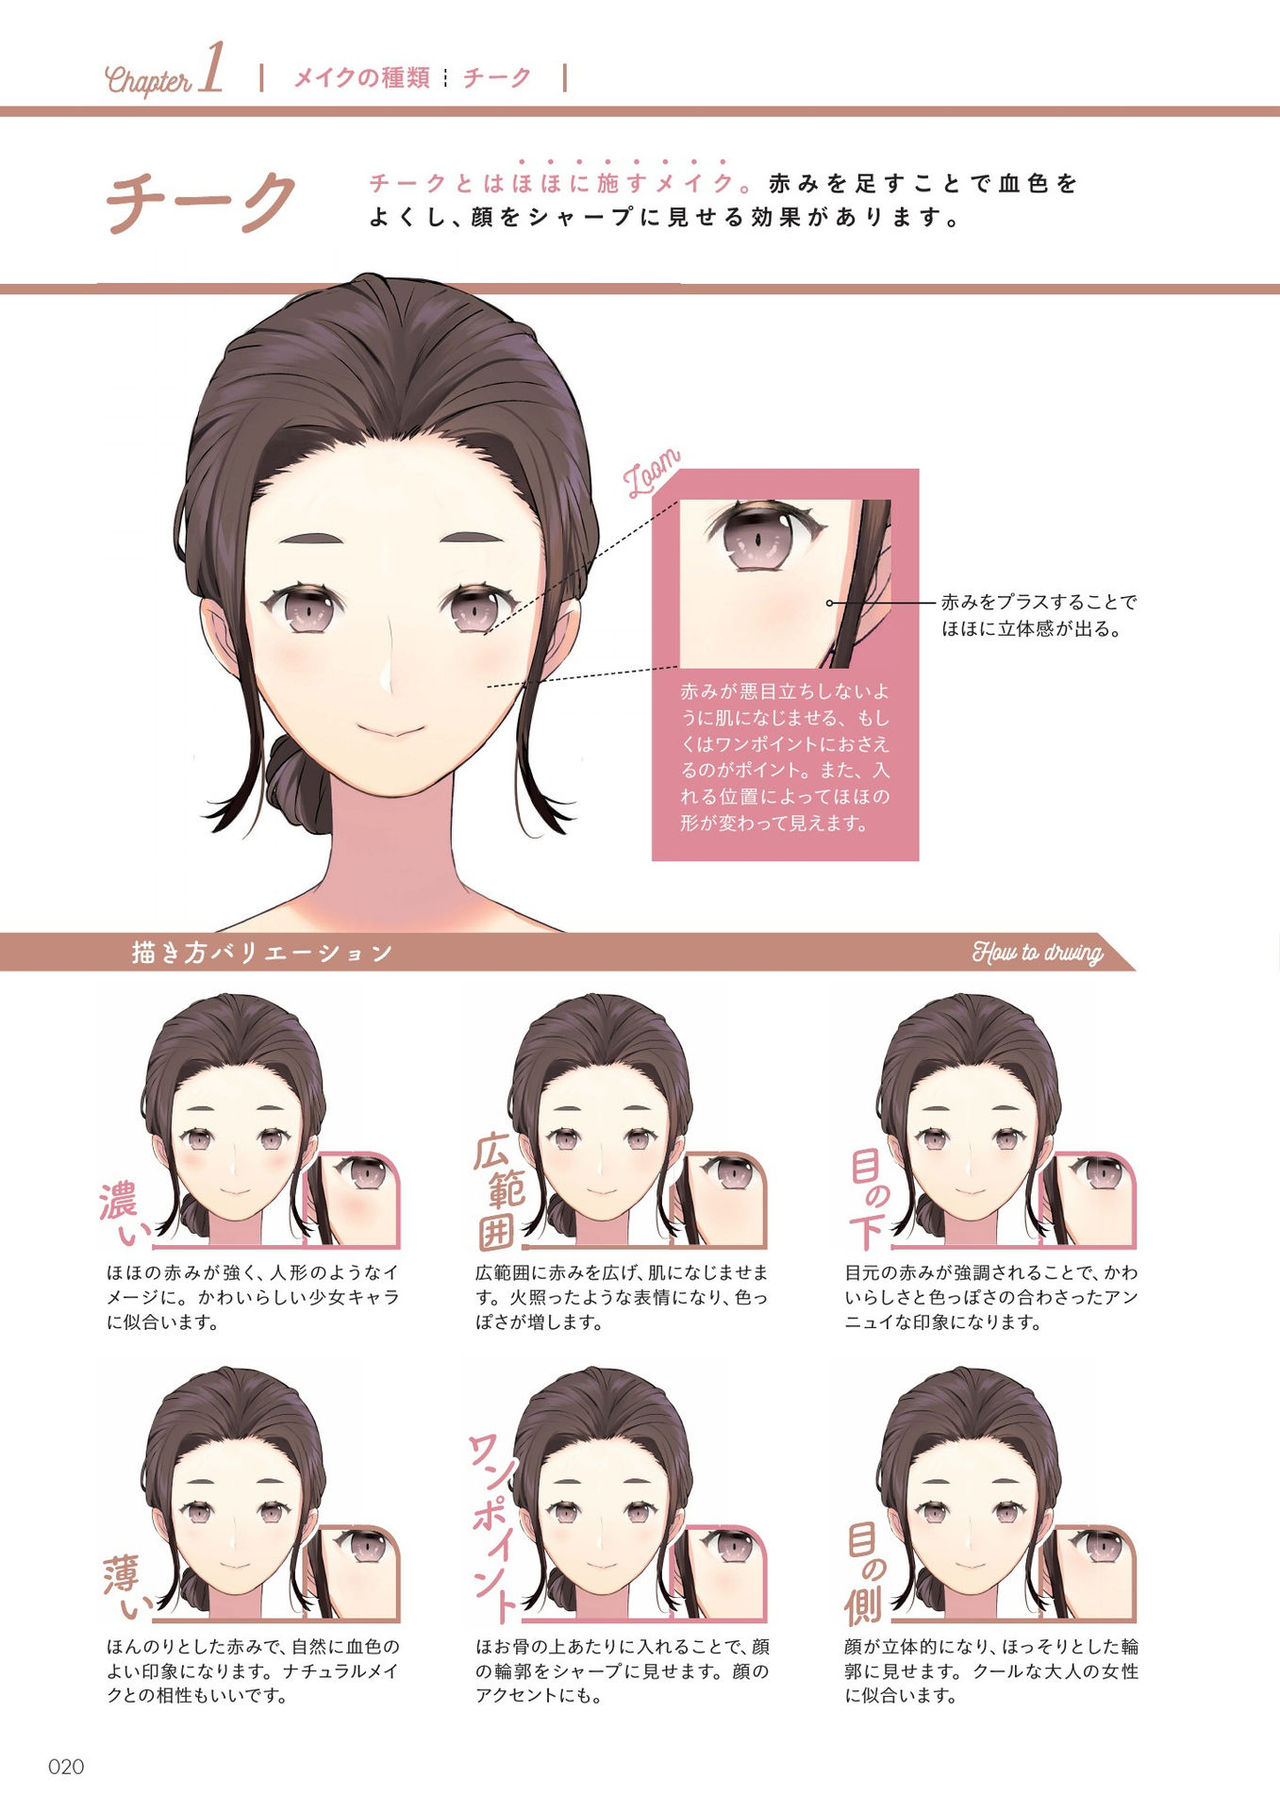 [sogawa]Super drawable series Techniques for drawing female characters with makeup  - 1話(1/4) - 6